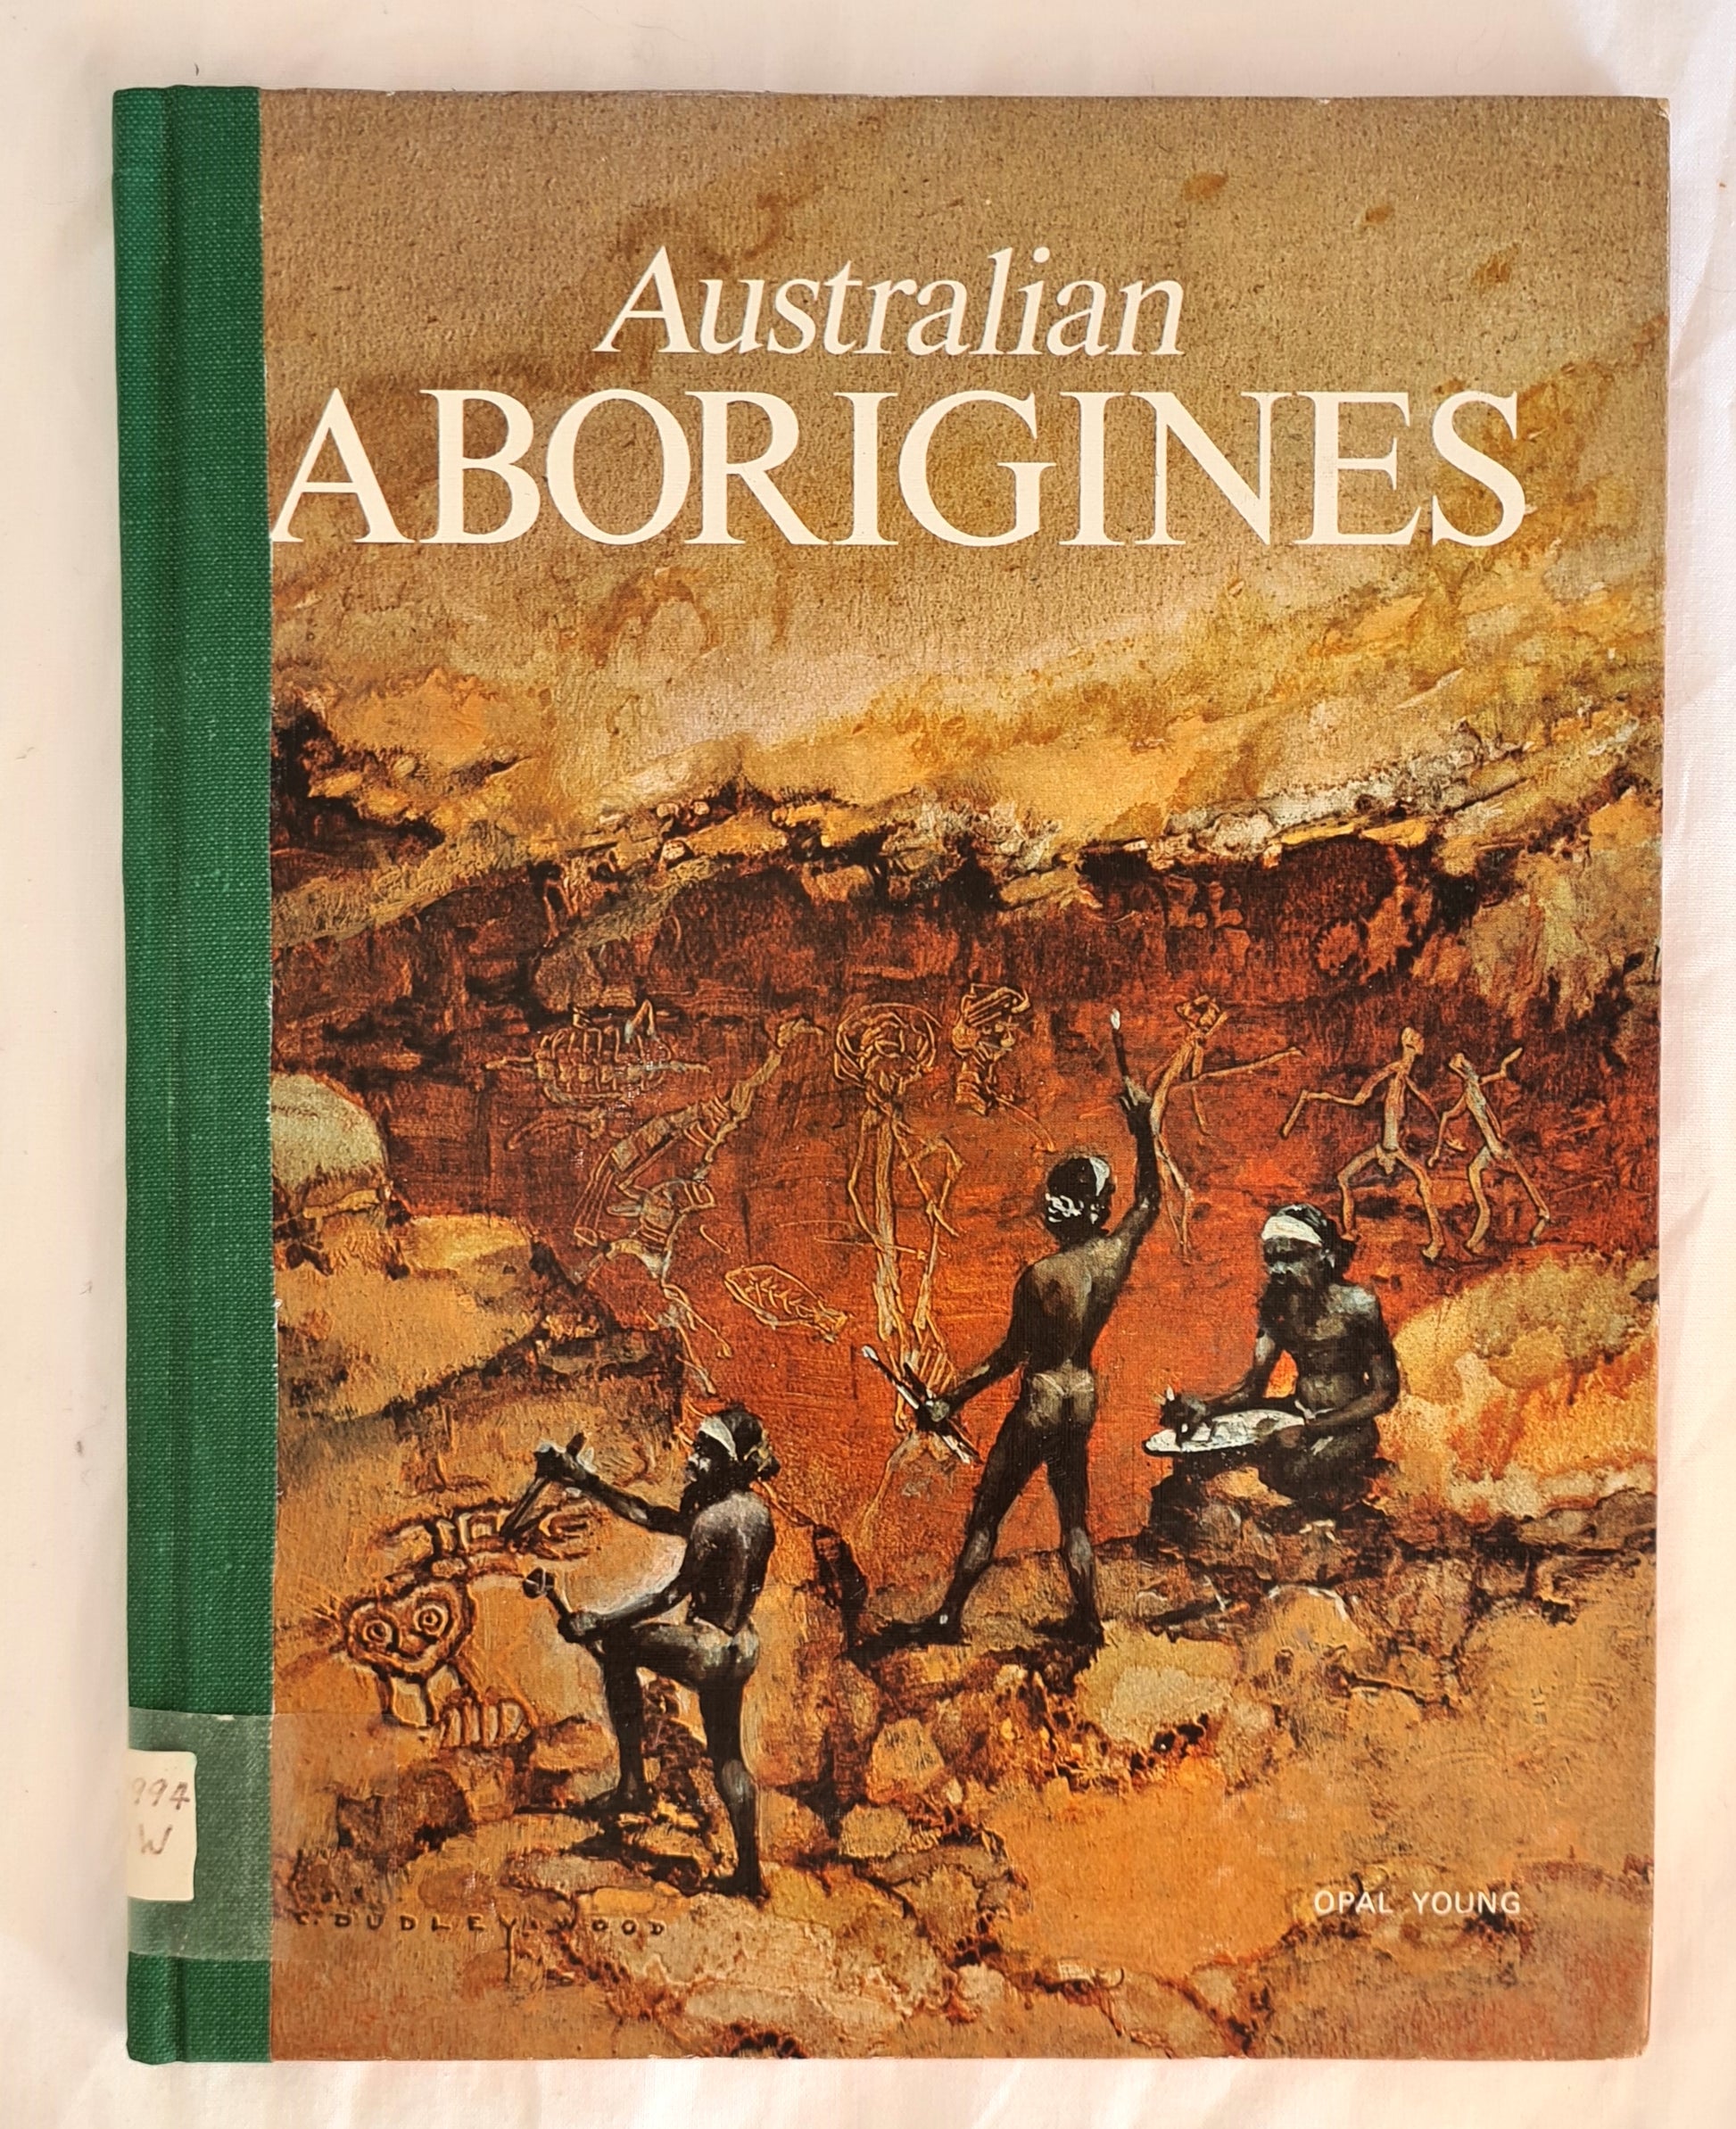 Australian Aborigines  by Robert Edwards  Illustrated by C. Dudley Wood